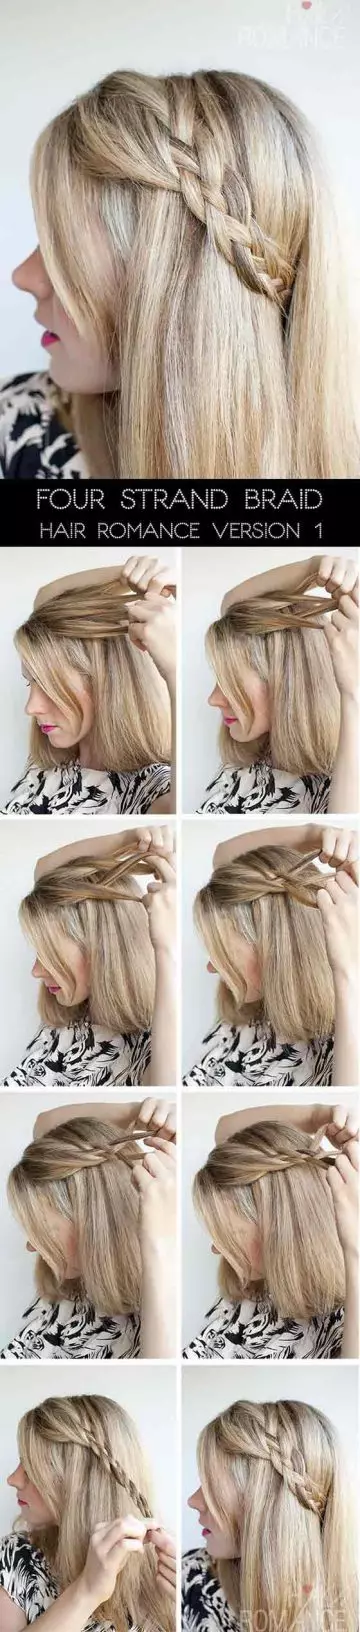 Four strand accent braid braided hairstyle for long hair